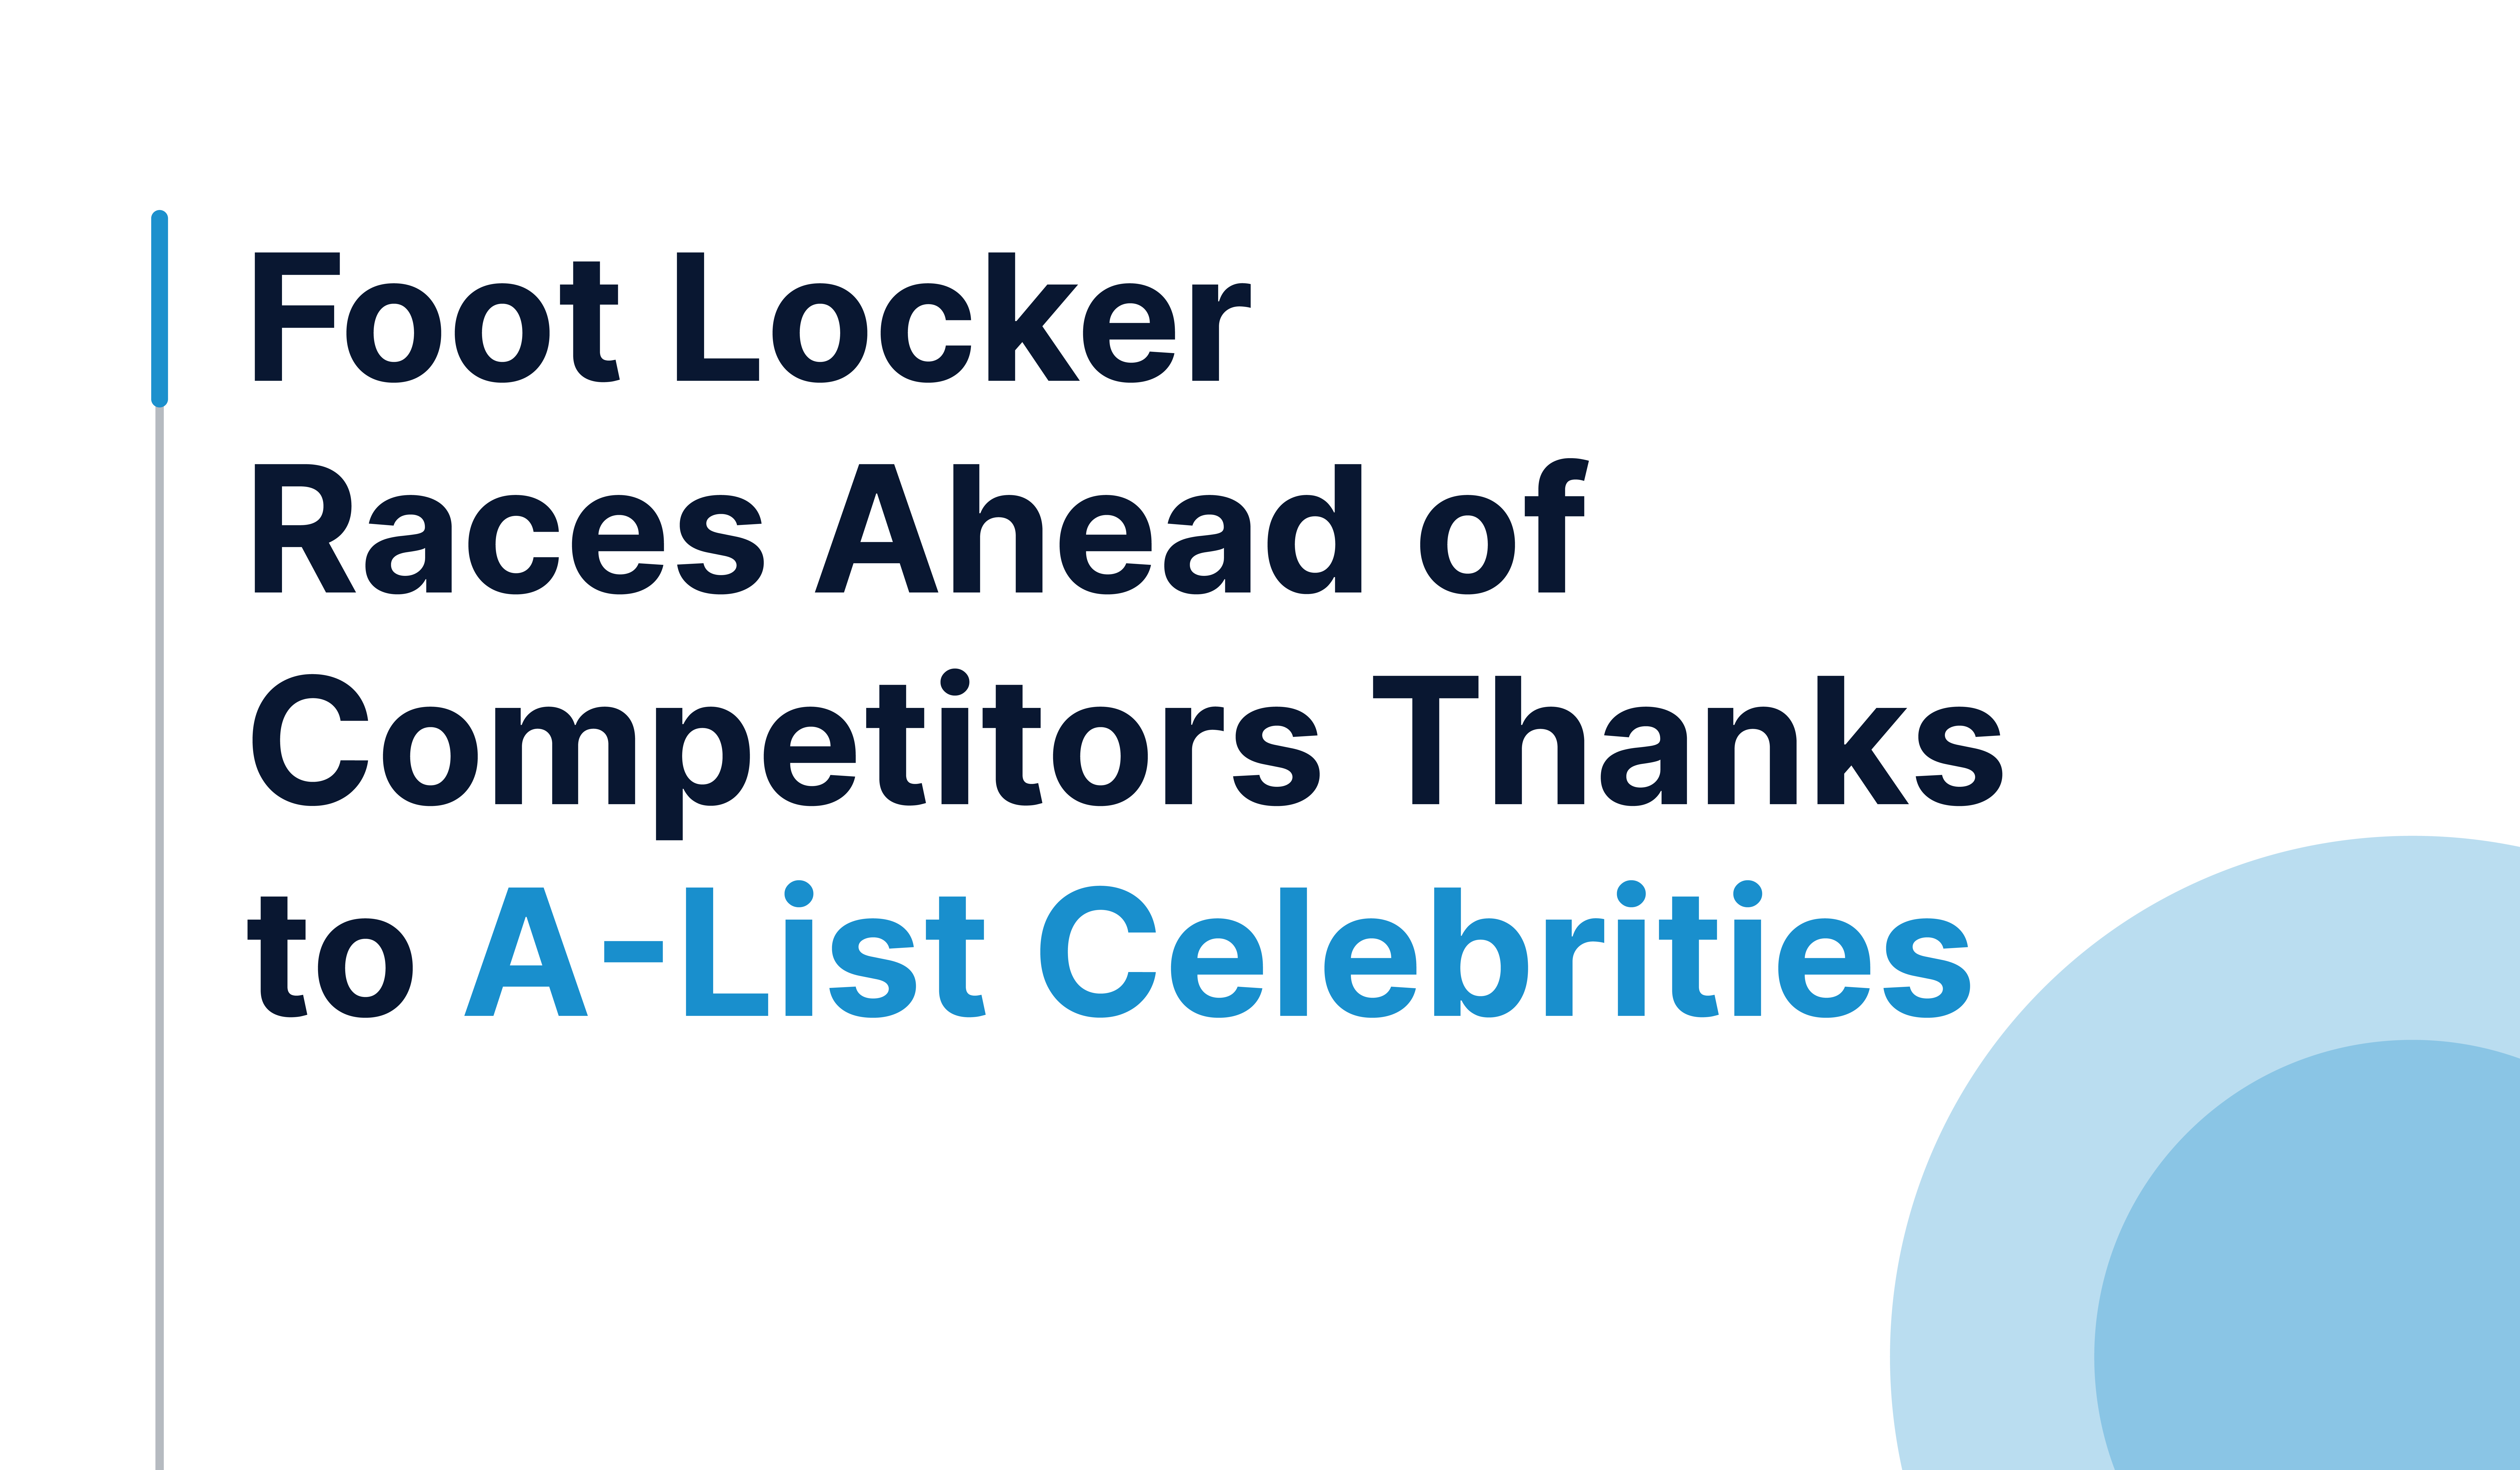 Foot Locker Races Ahead of Competitors Thanks to A-List Celebrities